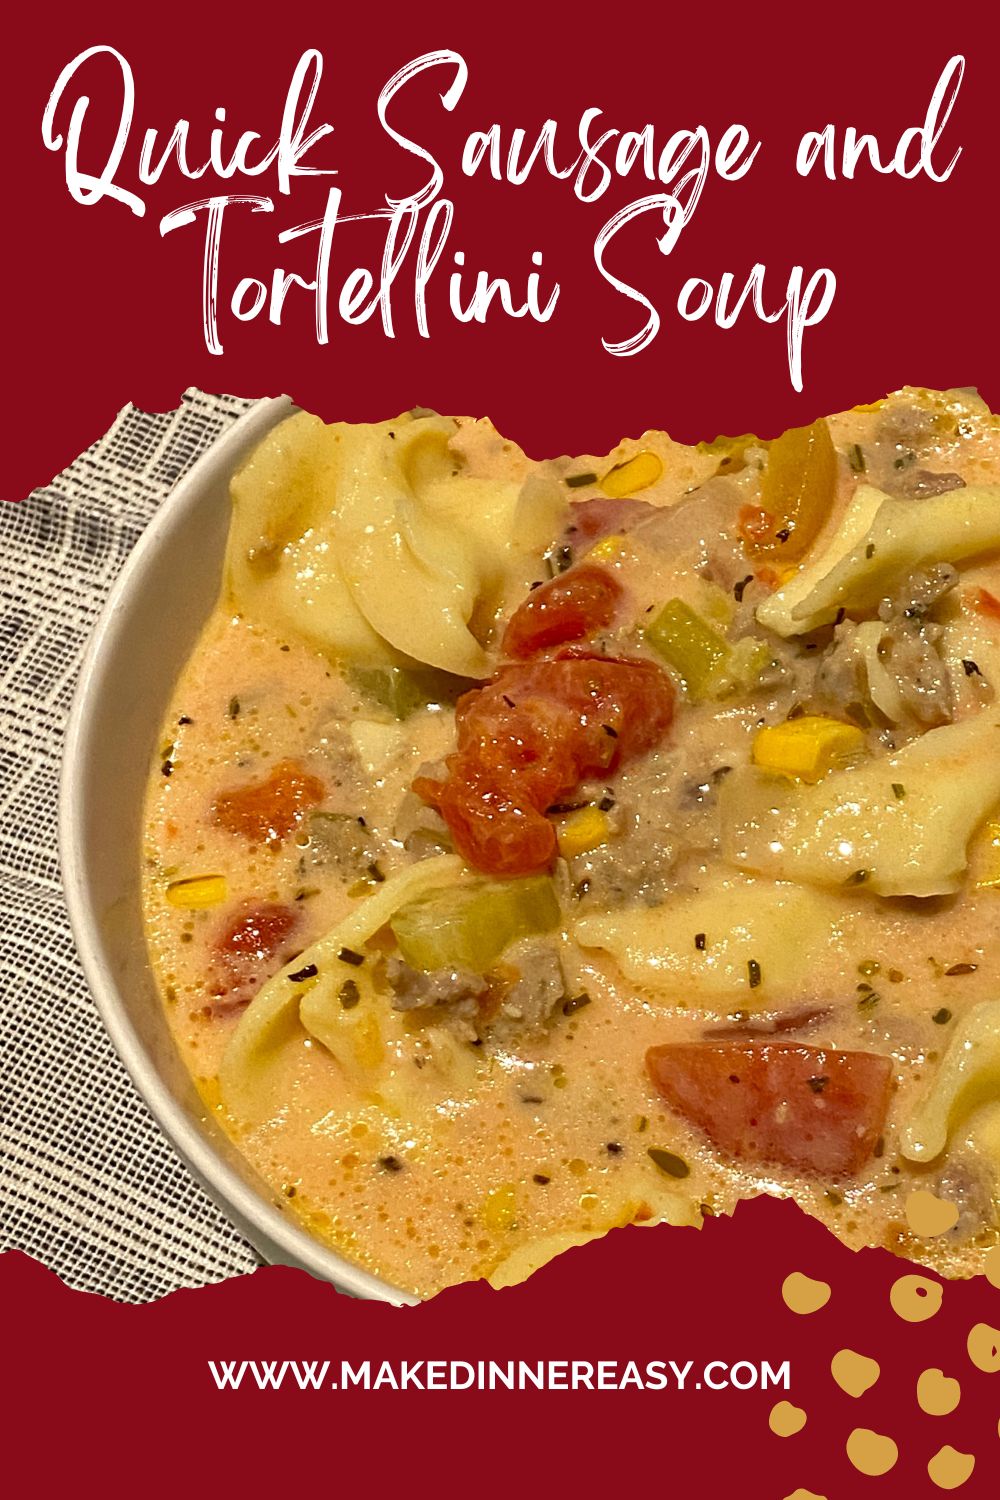 Sausage-and-tortellini-soup-pintrest